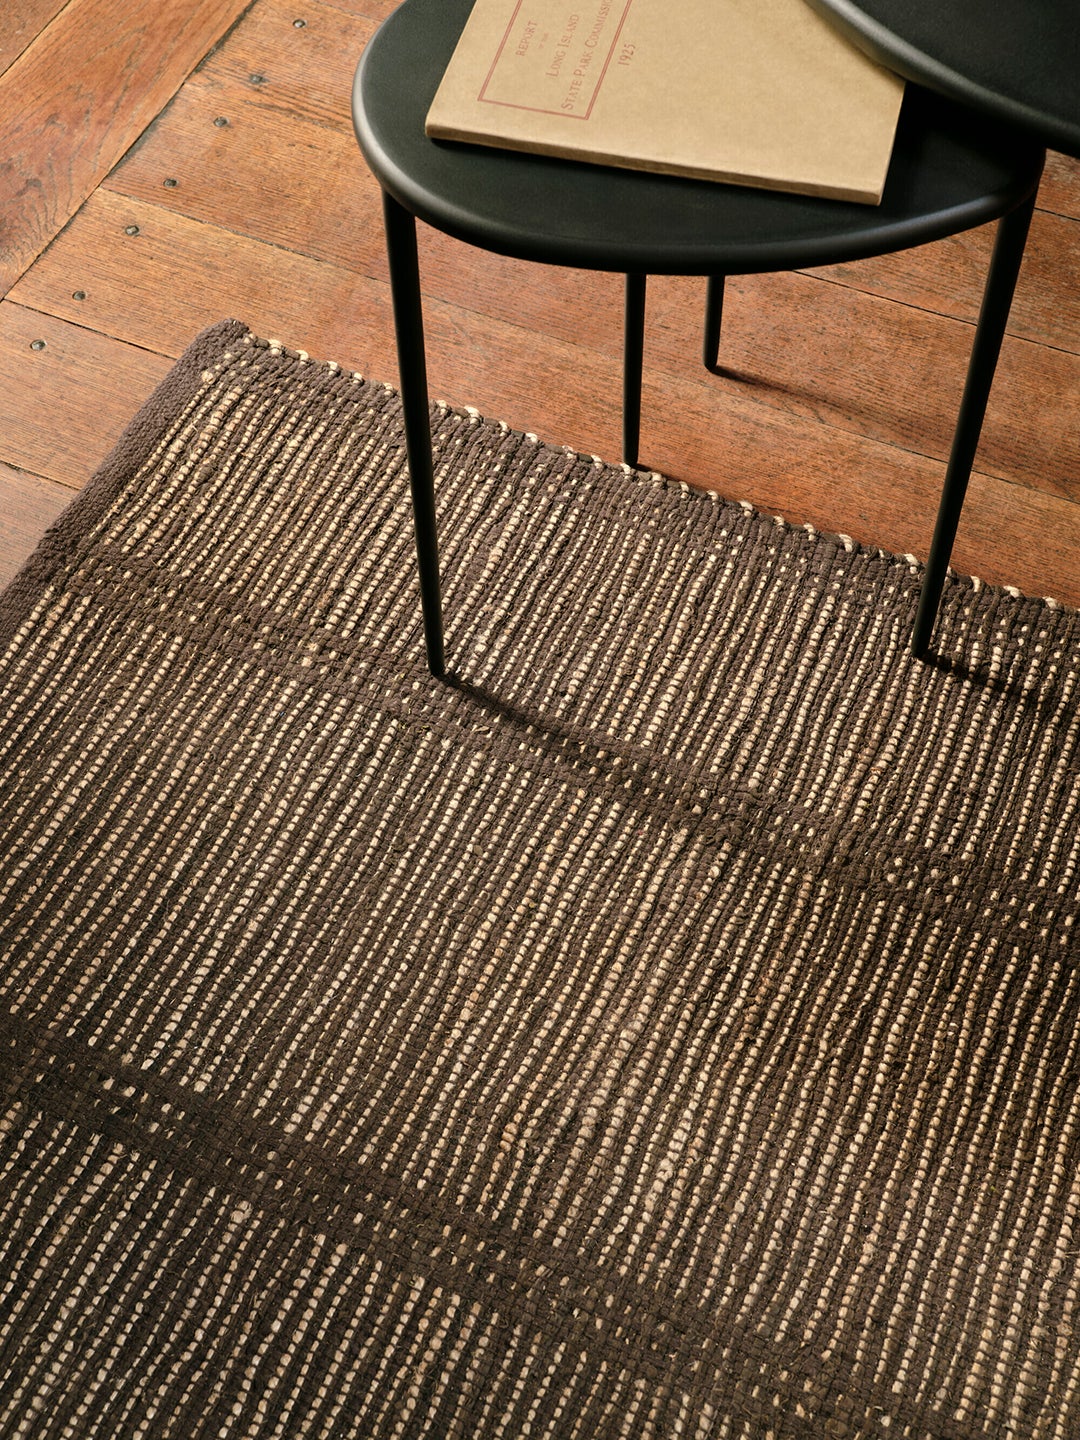 An Actually Soft Jute Rug Is the Unsung Hero of Colin King’s West Elm Collab